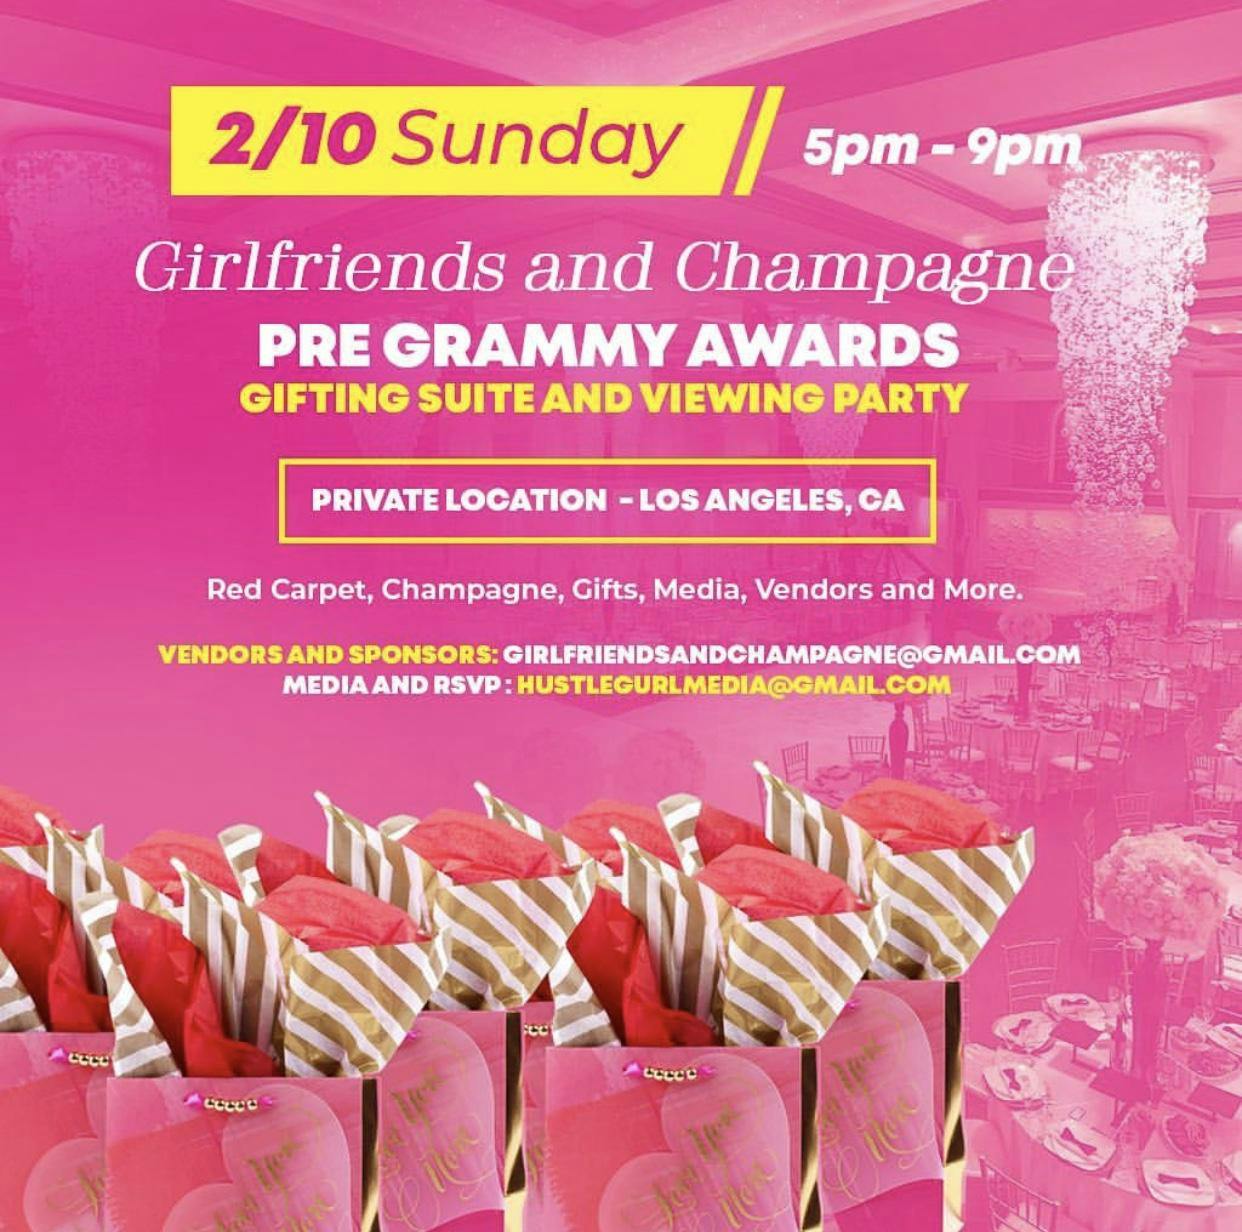 Girlfriends and Champagne Pre Grammy Gifting Suite and Viewing Party with Celebrity Guest